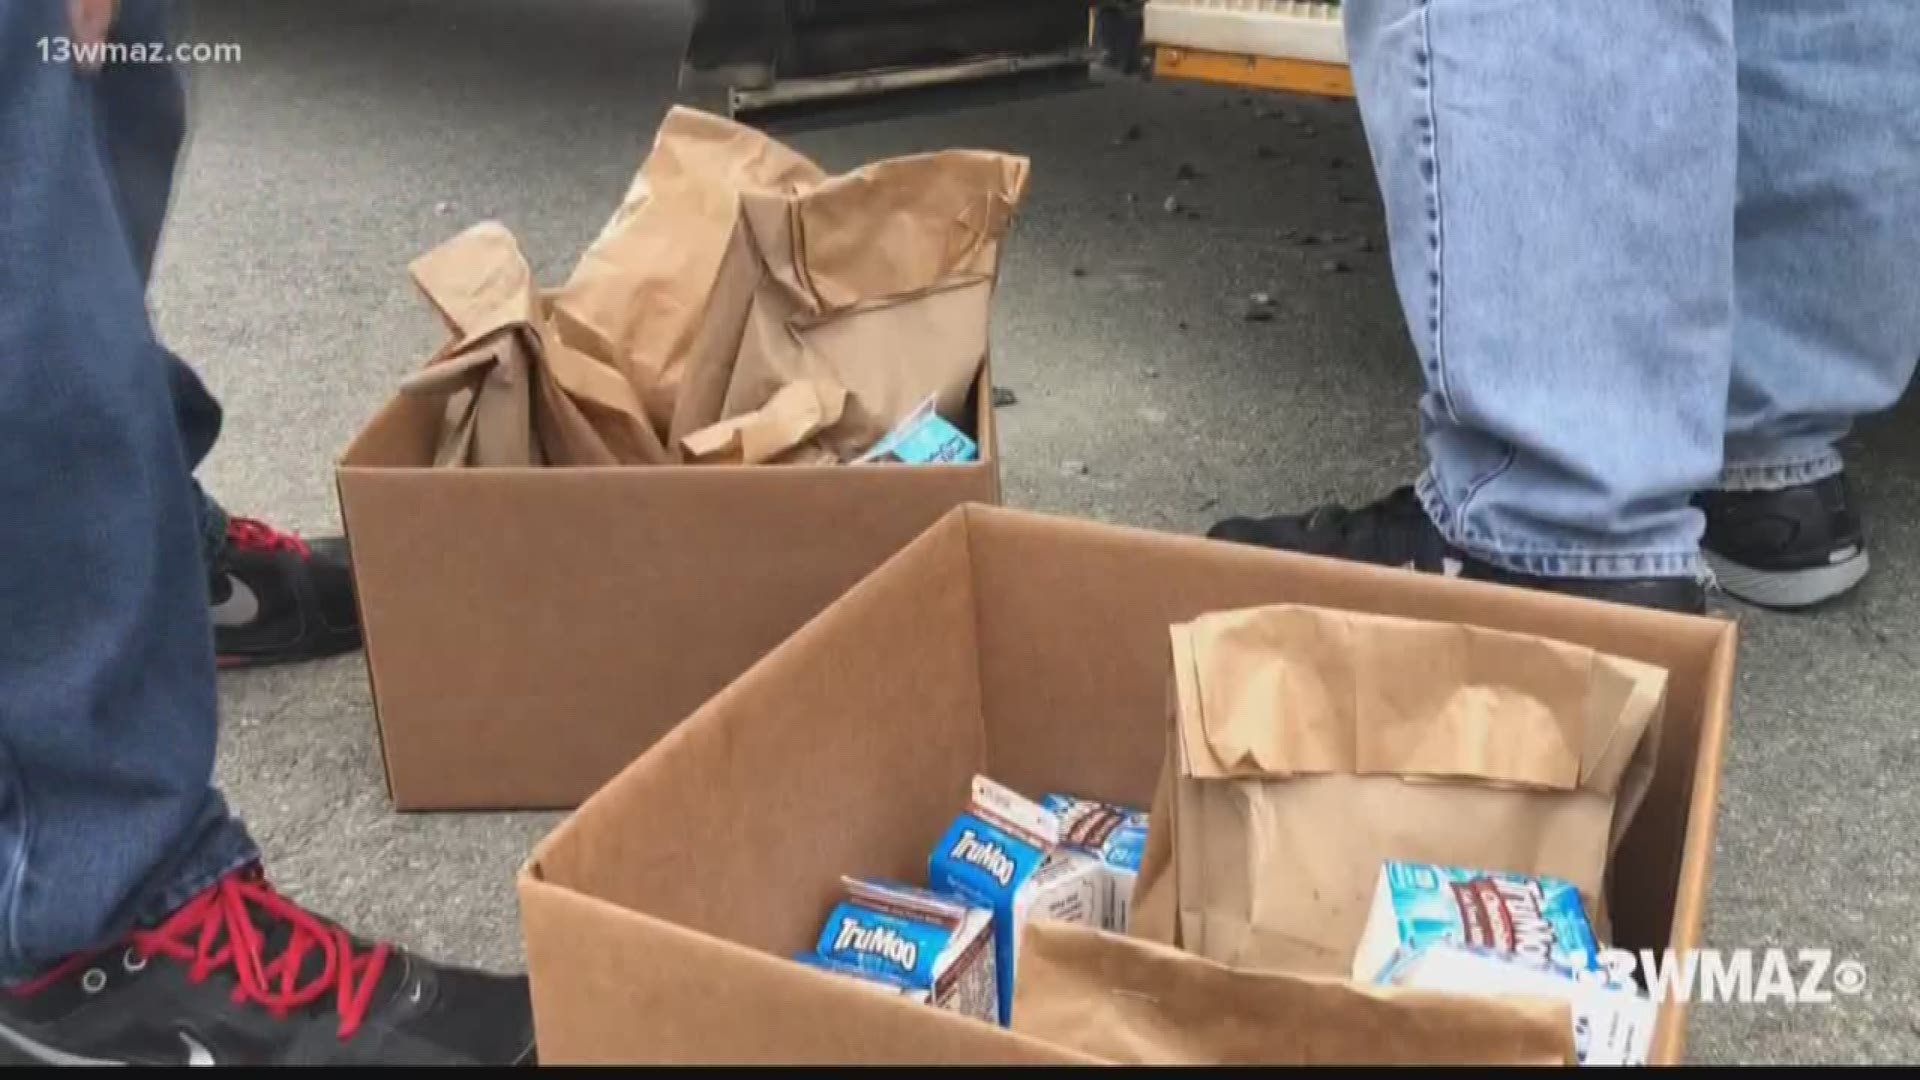 While schools are adjusting schedules, they're also adjusting meal plans so students won't go hungry. Jones County schools are delivering hundreds of meals via bus.